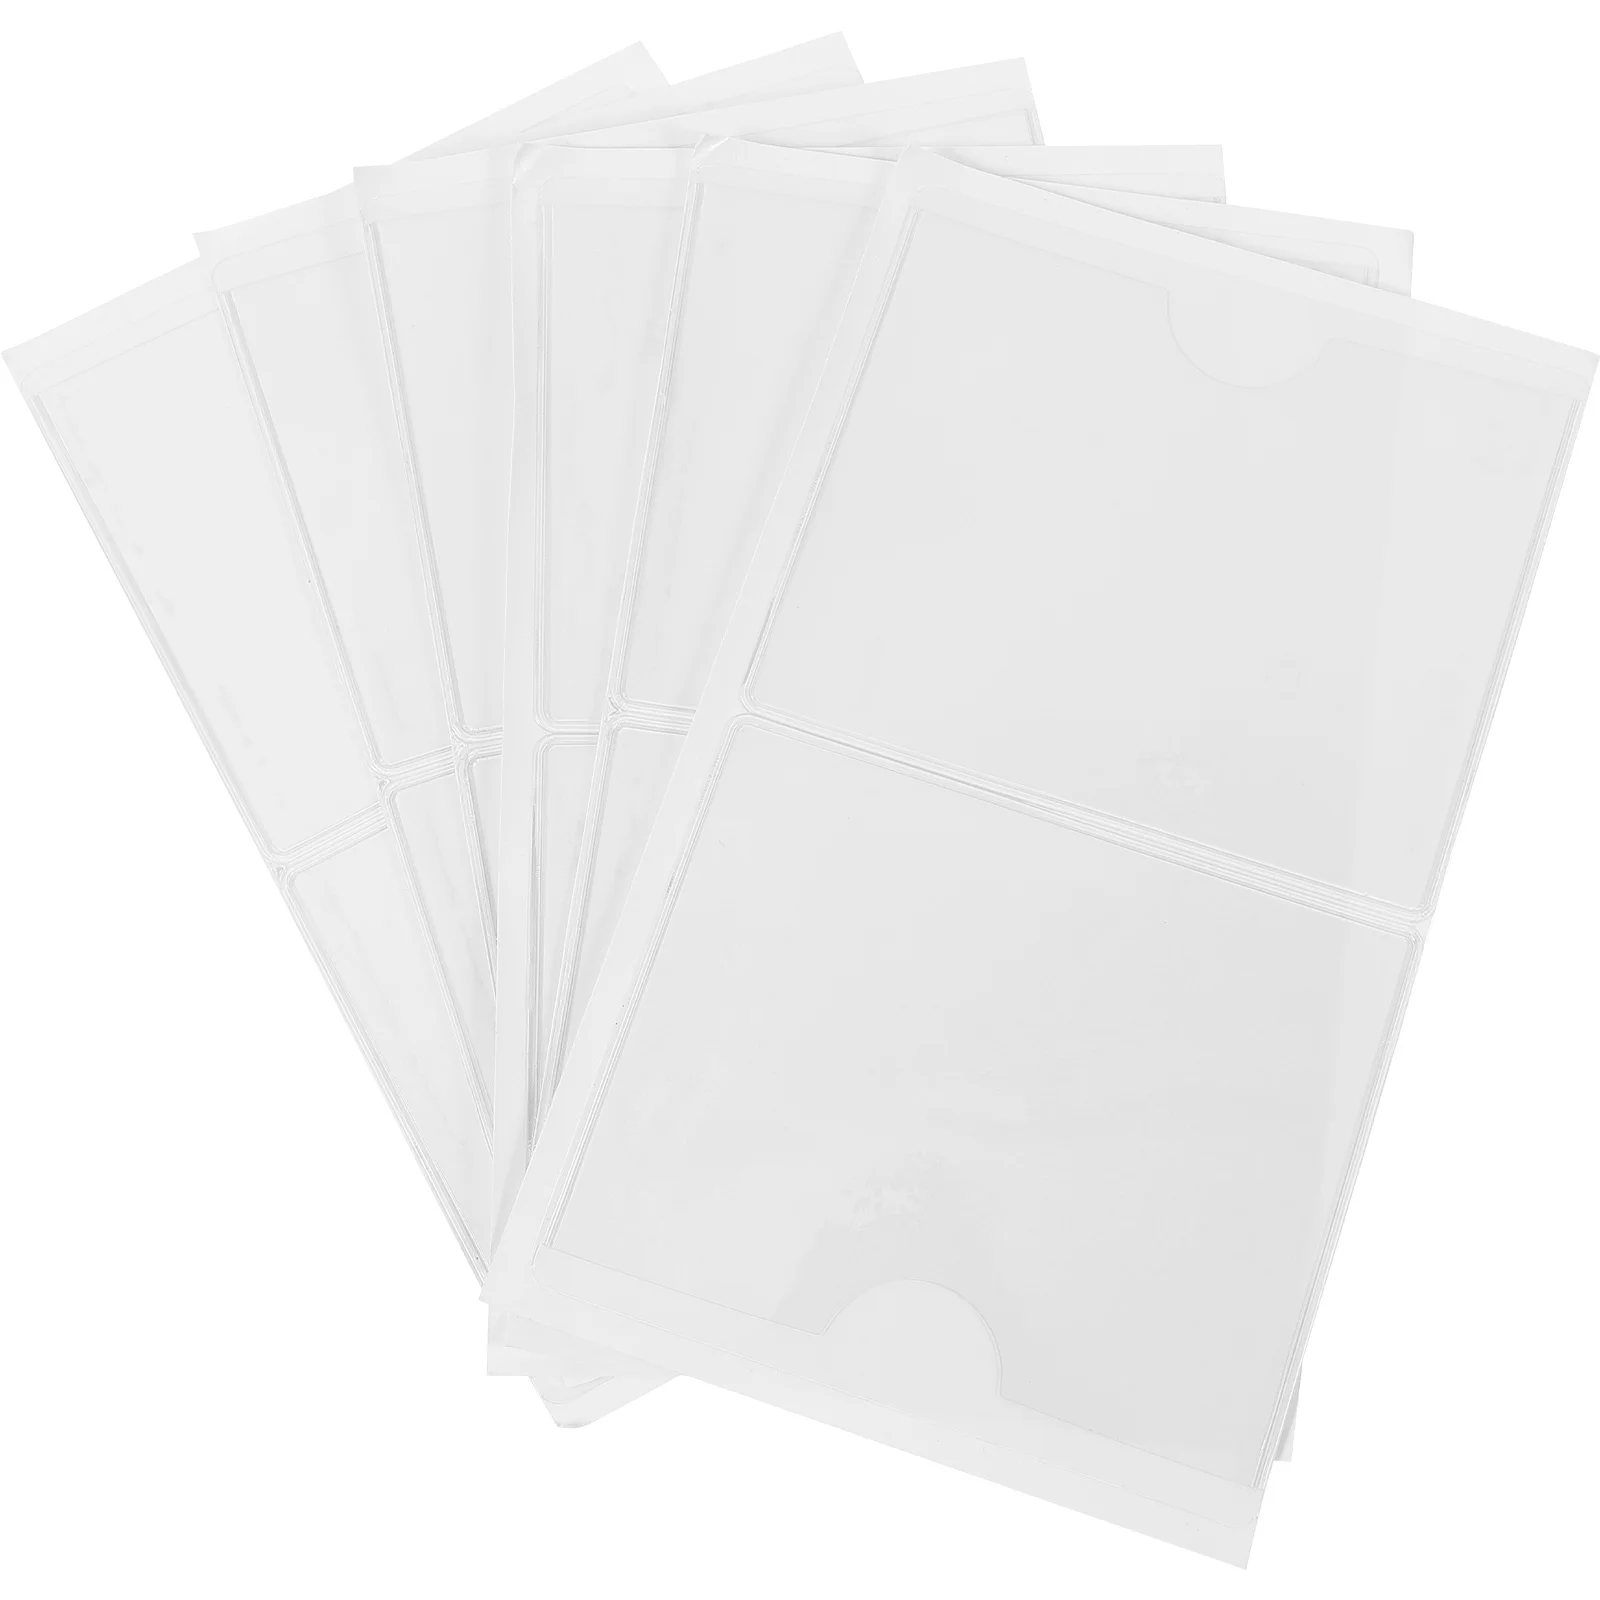 

12 Pcs Sticky Index Card Pockets Tag Warehouse Supplies Label Material Pouches Self-adhesive Holders